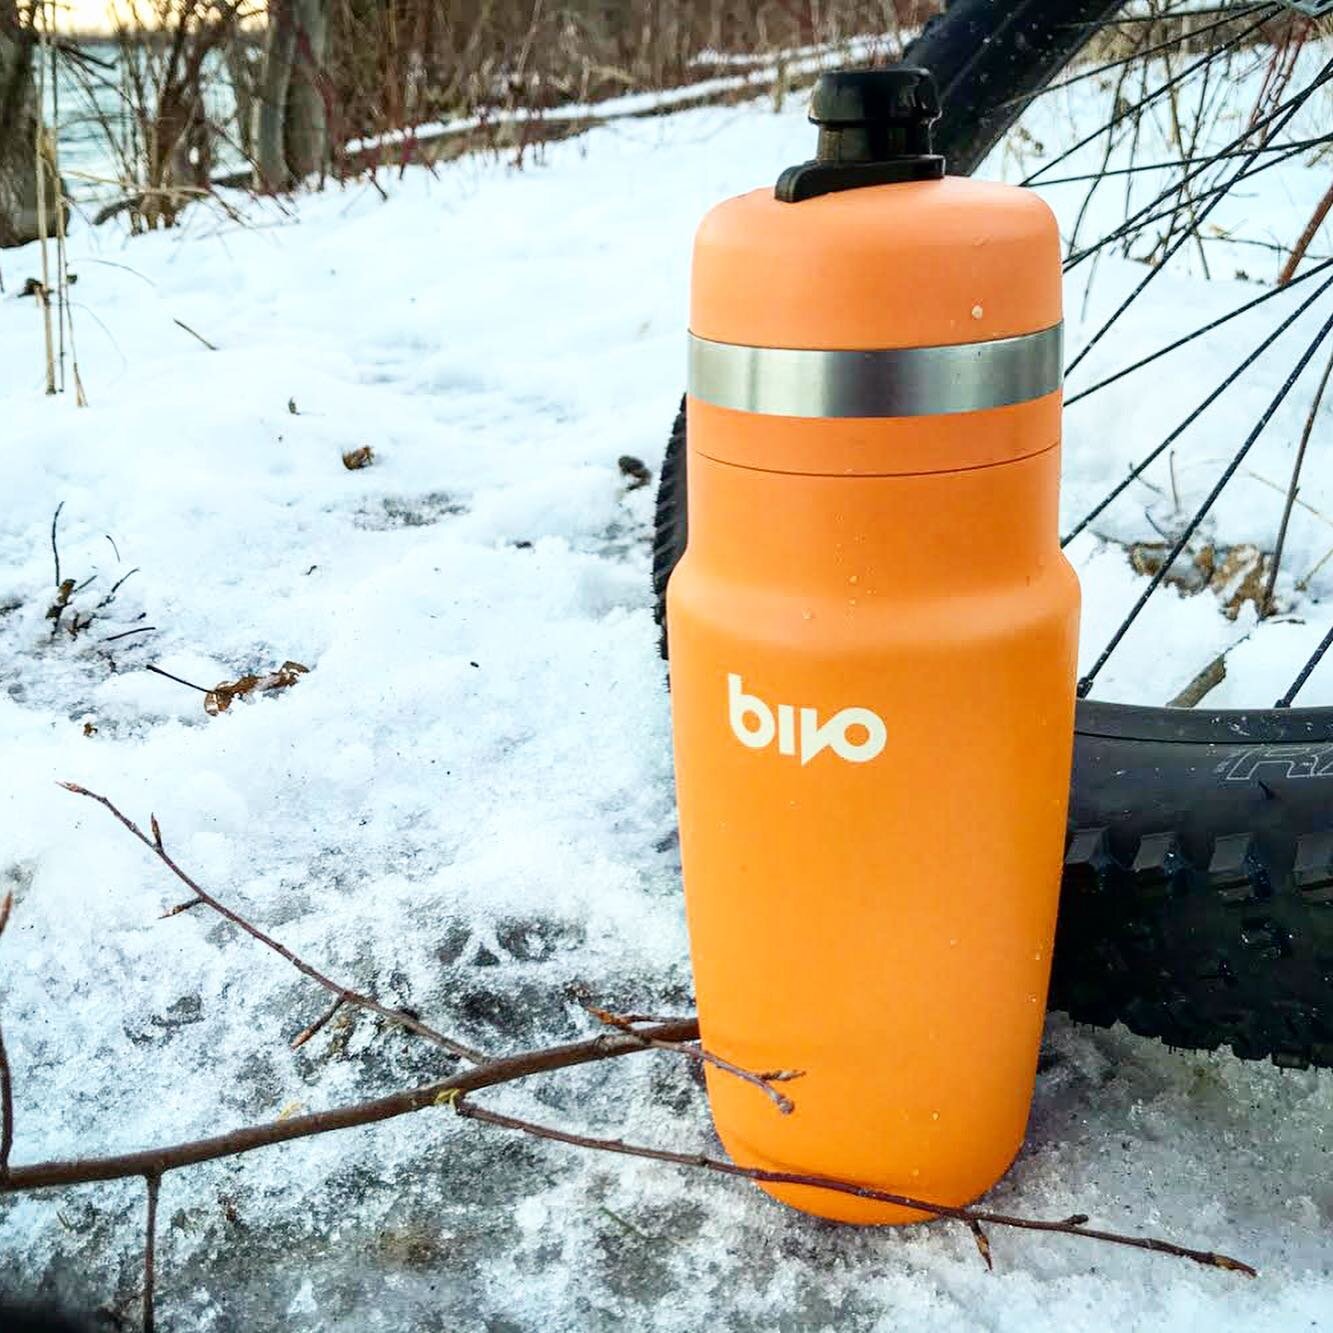 We&rsquo;ve been wanting to try out the new stainless steel performance @drinkbivo water bottle design with perfect flow for awhile now.

Field testing water bottles in the cold is always a challenge. But it&rsquo;s been great to fill them with boili